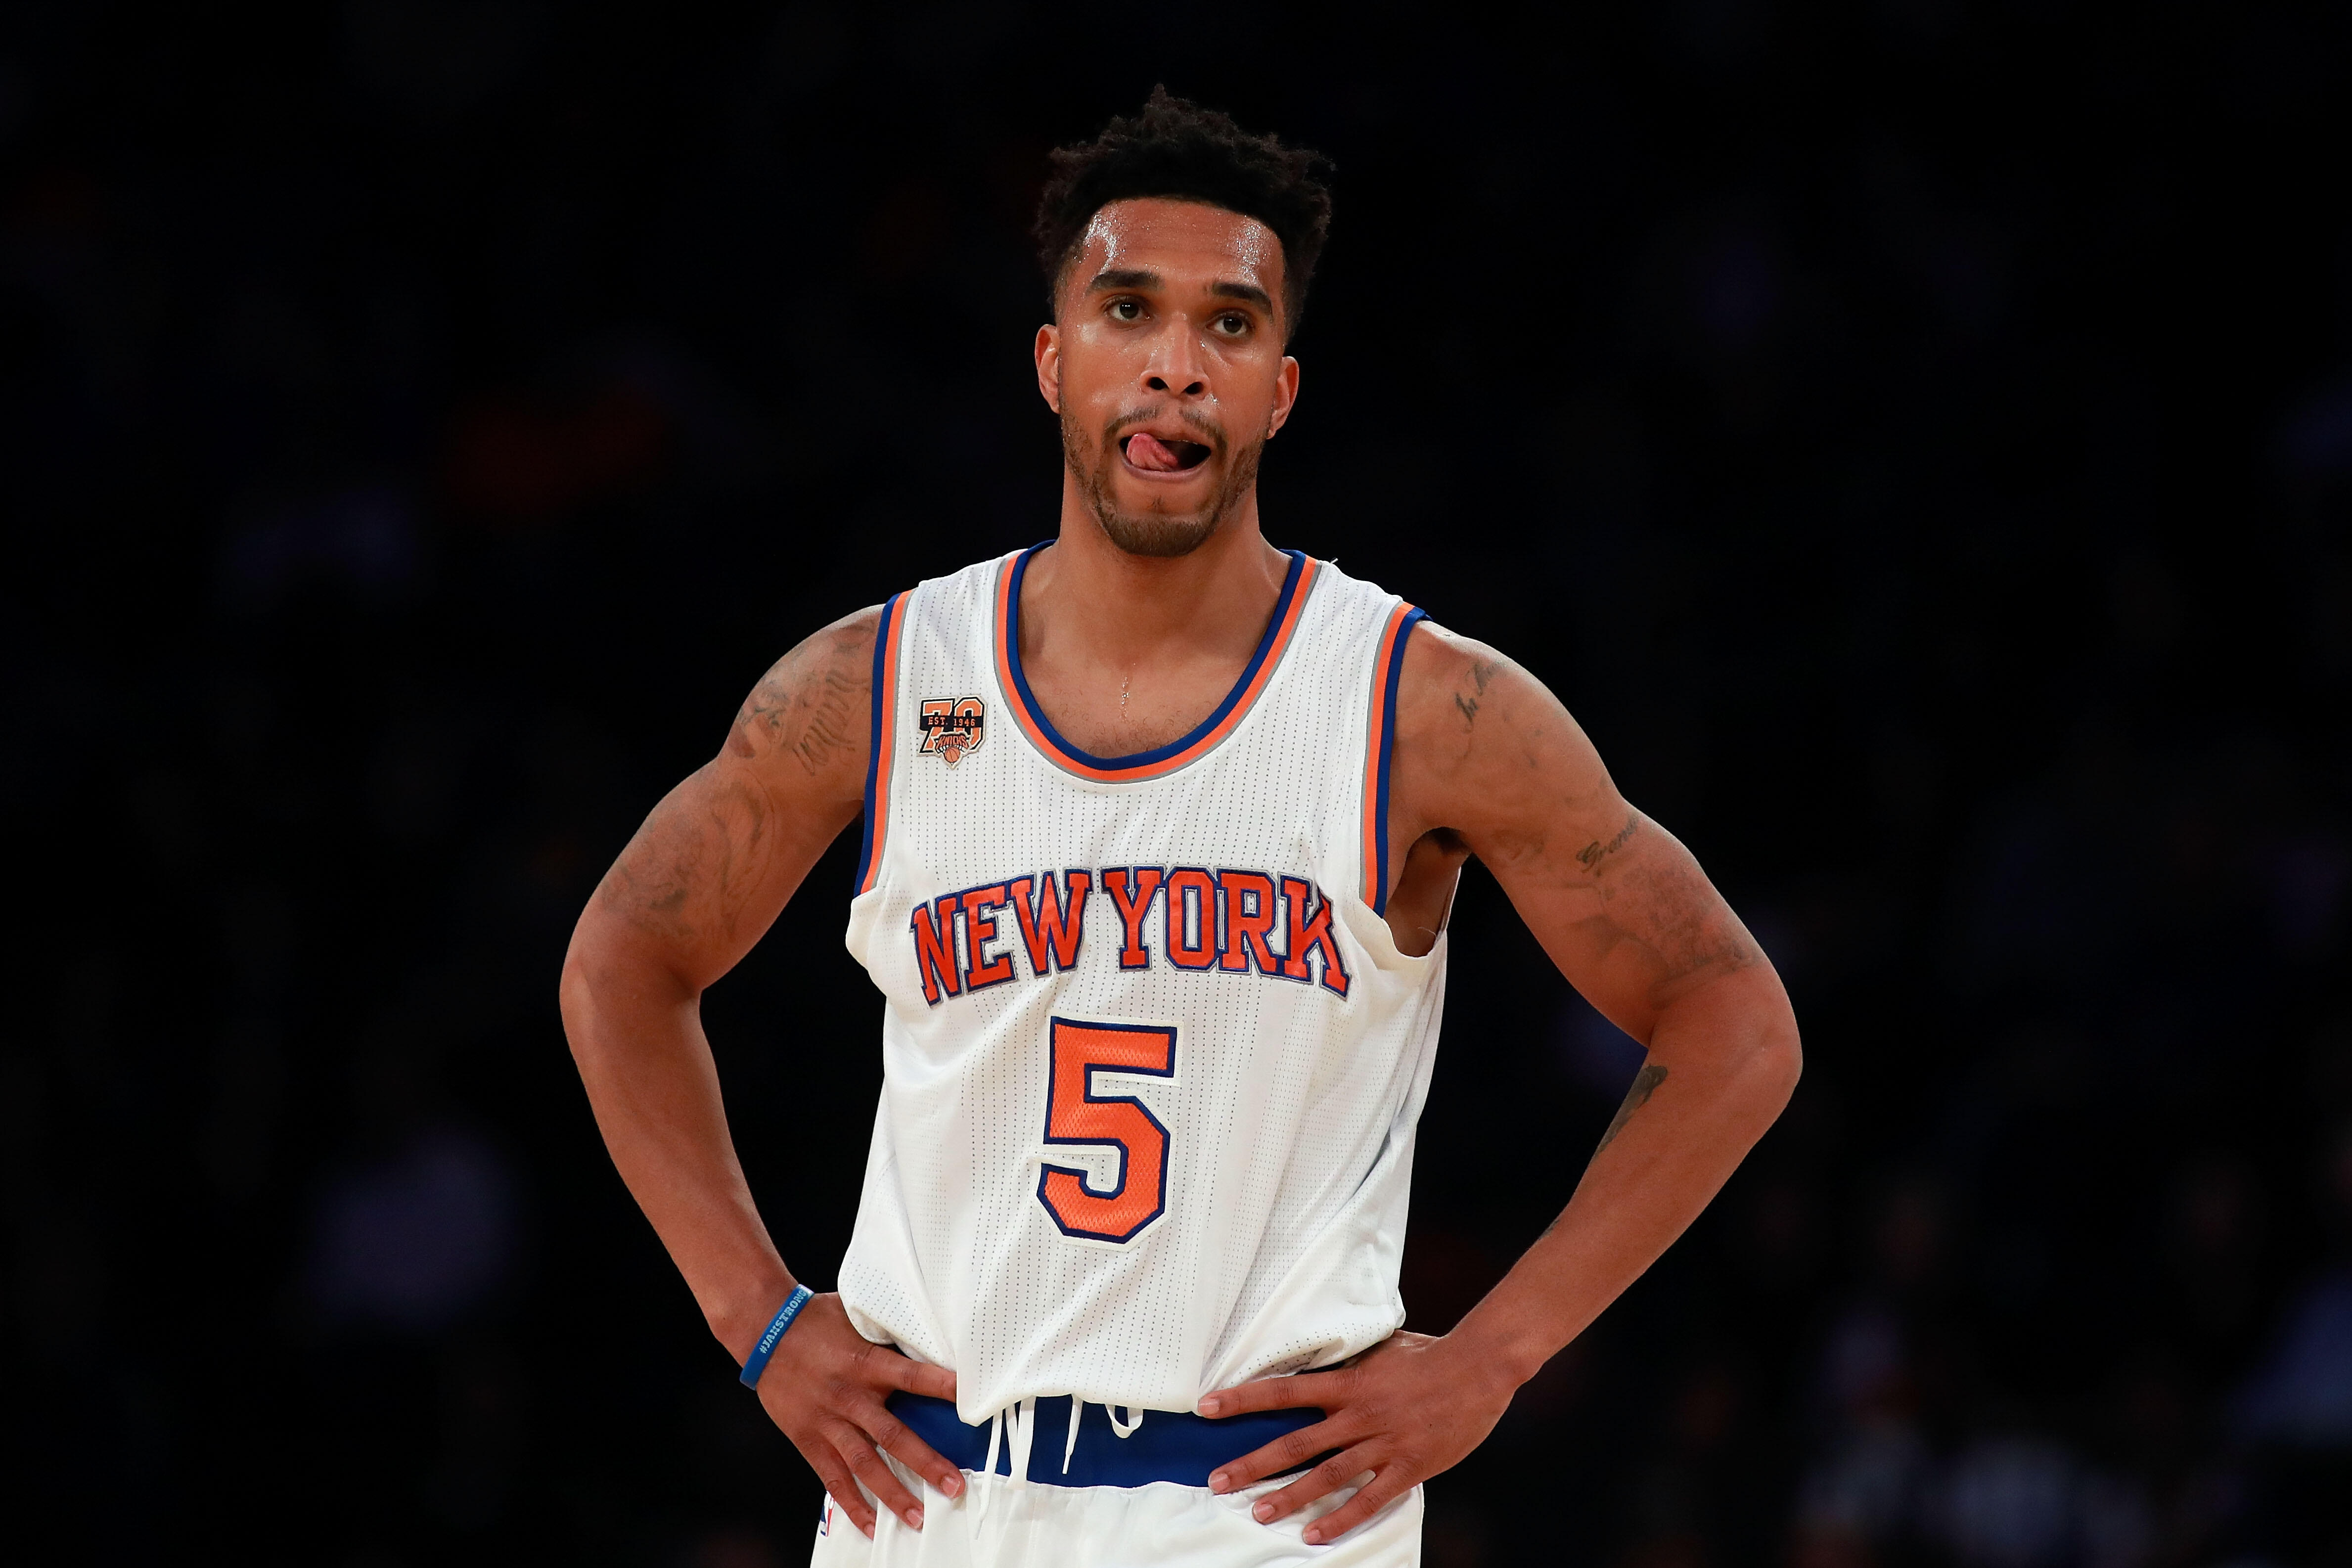 NEW YORK, NY - OCTOBER 29:  Courtney Lee #5 of the New York Knicks looks on against the Memphis Grizzlies during the first half at Madison Square Garden on October 29, 2016 in New York City. NOTE TO USER: User expressly acknowledges and agrees that, by do